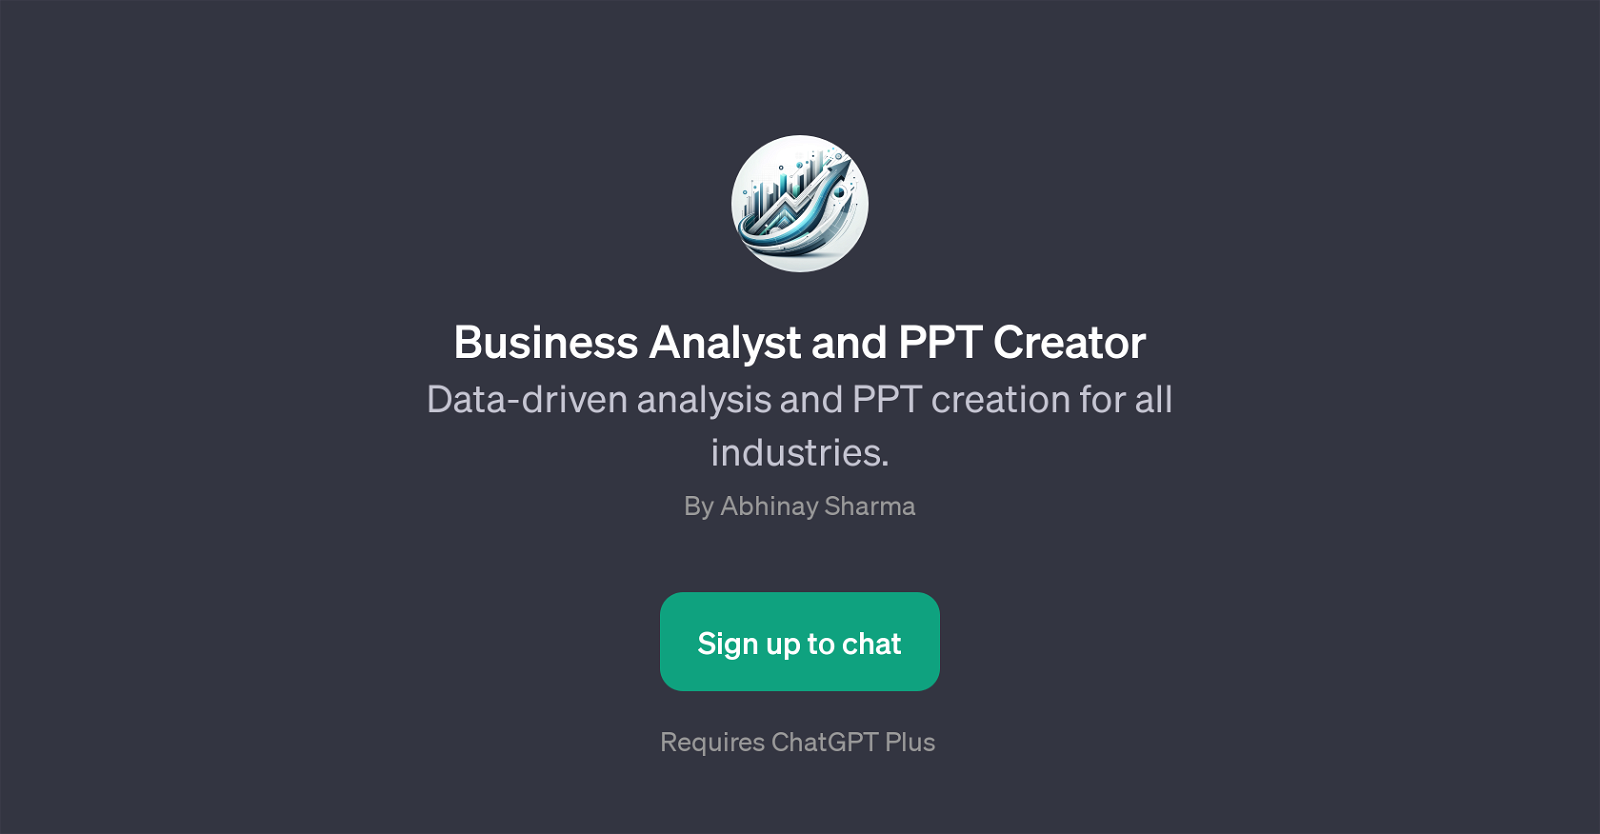 Business Analyst and PPT Creator website